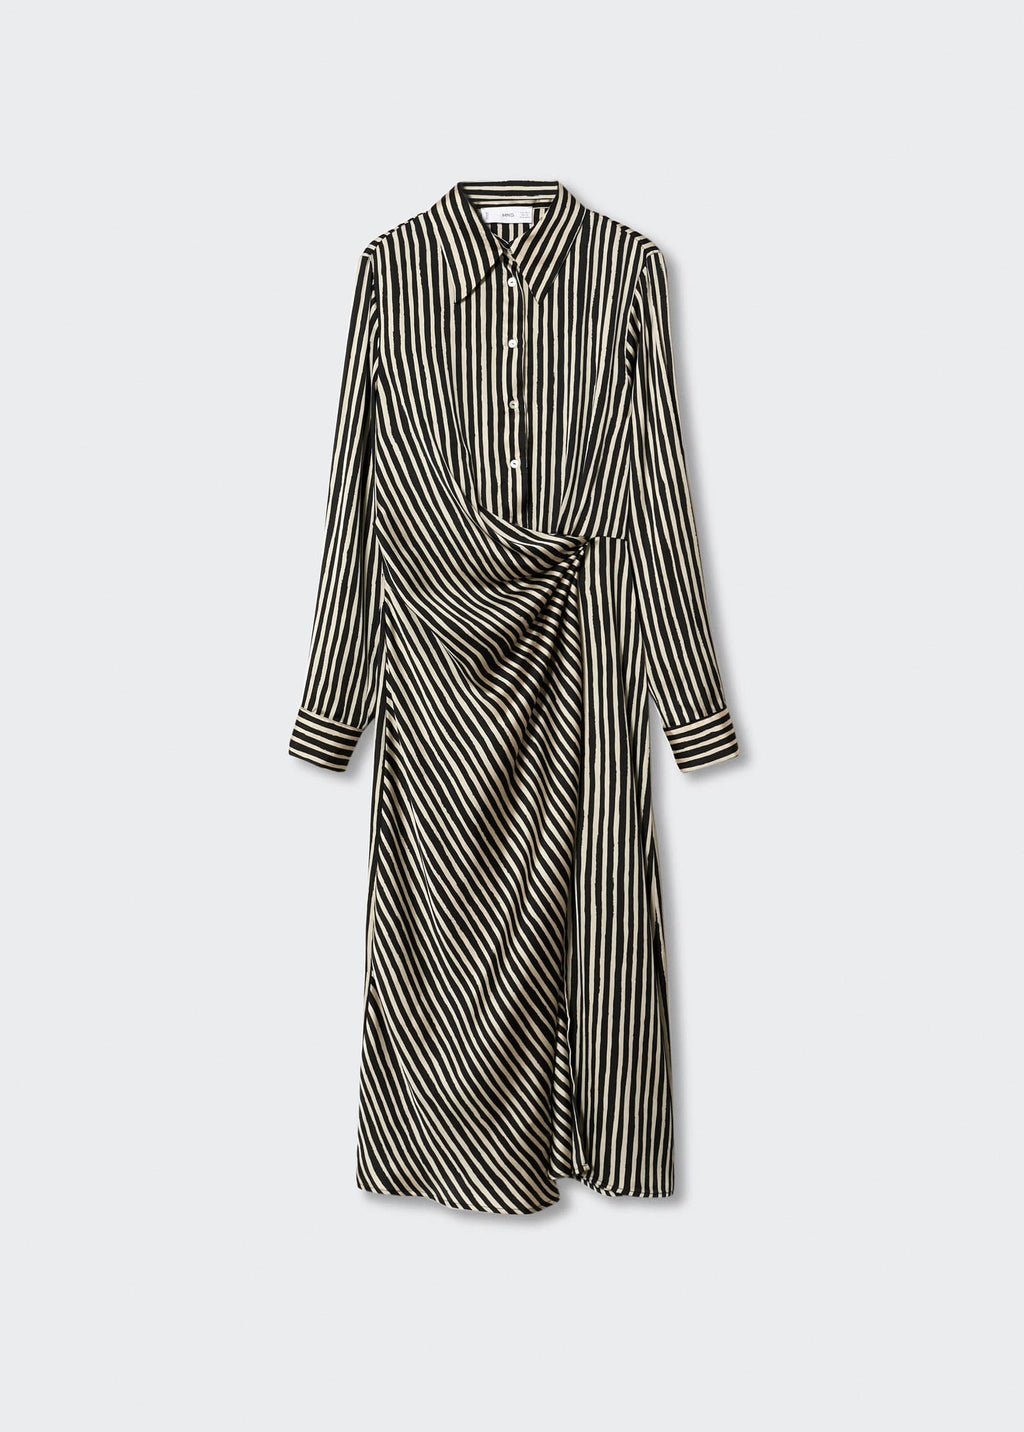 Striped satin dress - Article without model